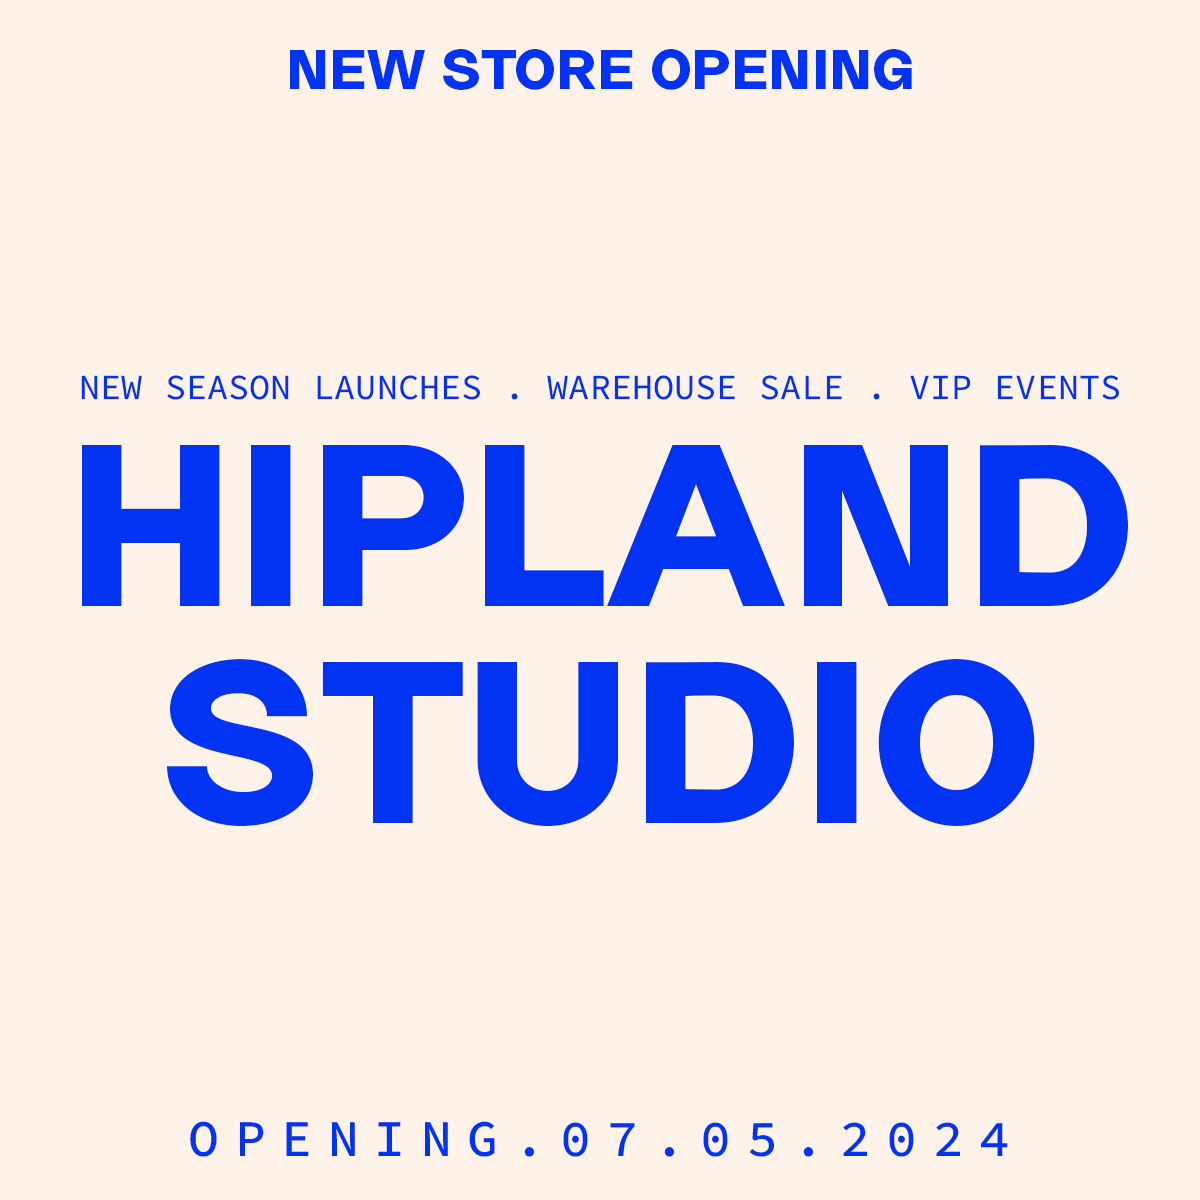 NEW STORE OPENING